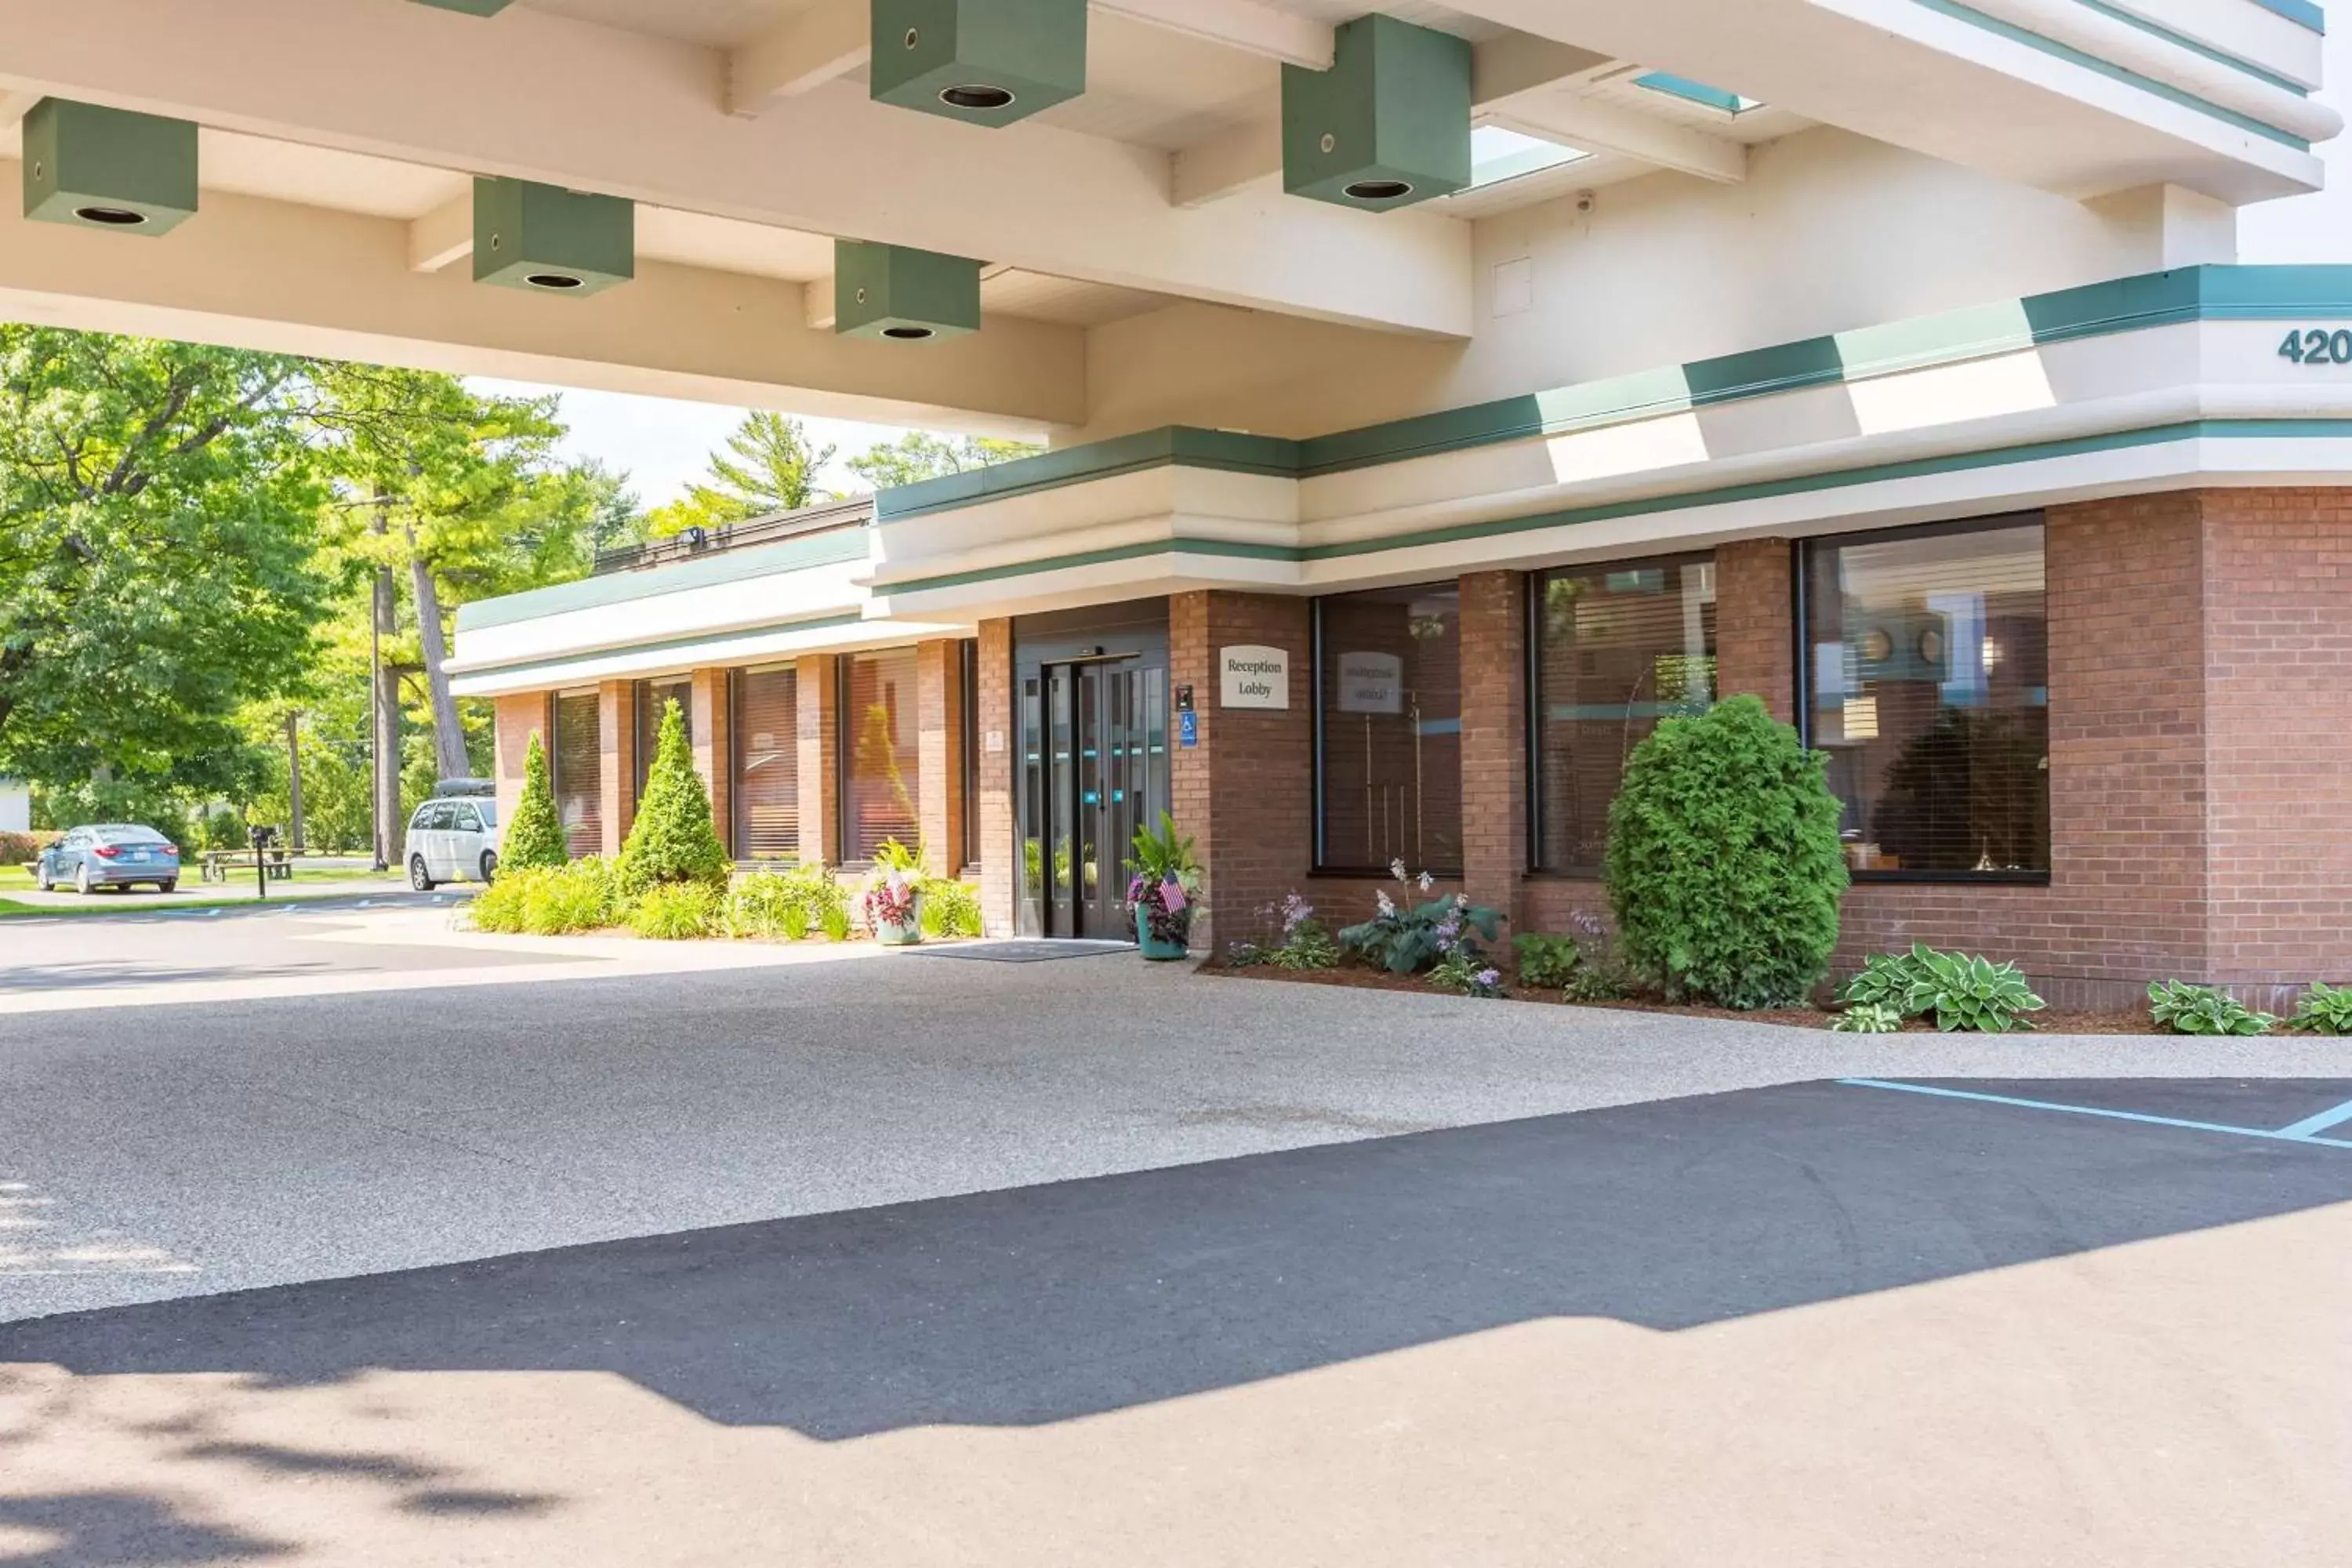 Property building in Country Inn & Suites by Radisson, Traverse City, MI